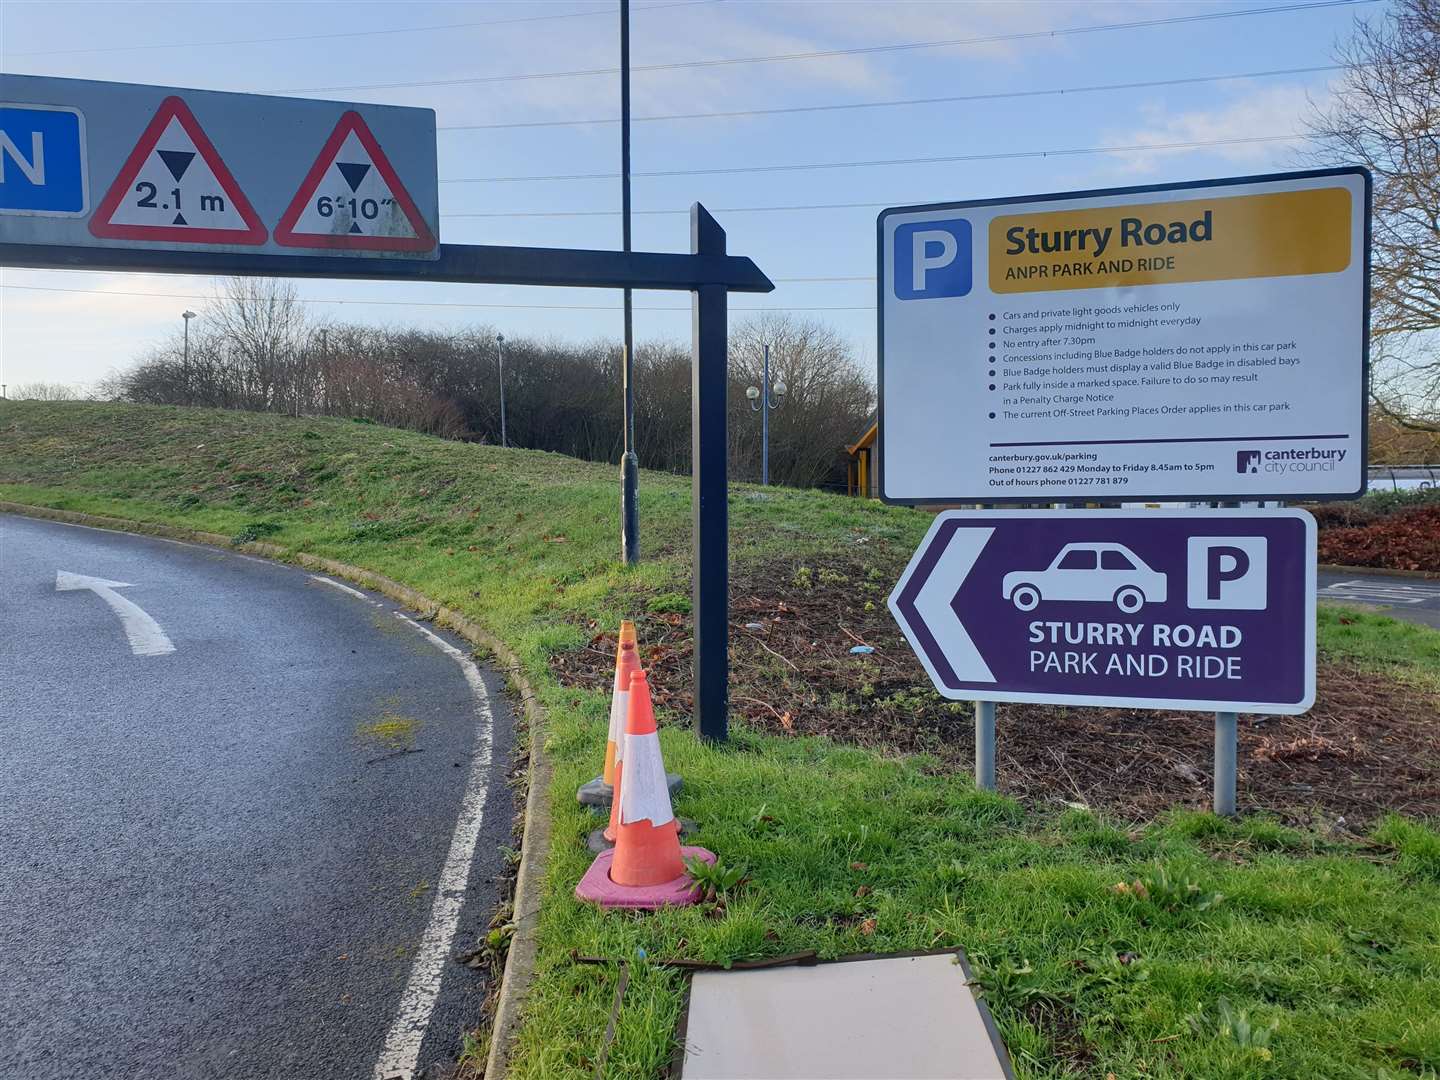 Canterbury City Council chiefs want to mothball Sturry Road Park and Ride in a bid to save money